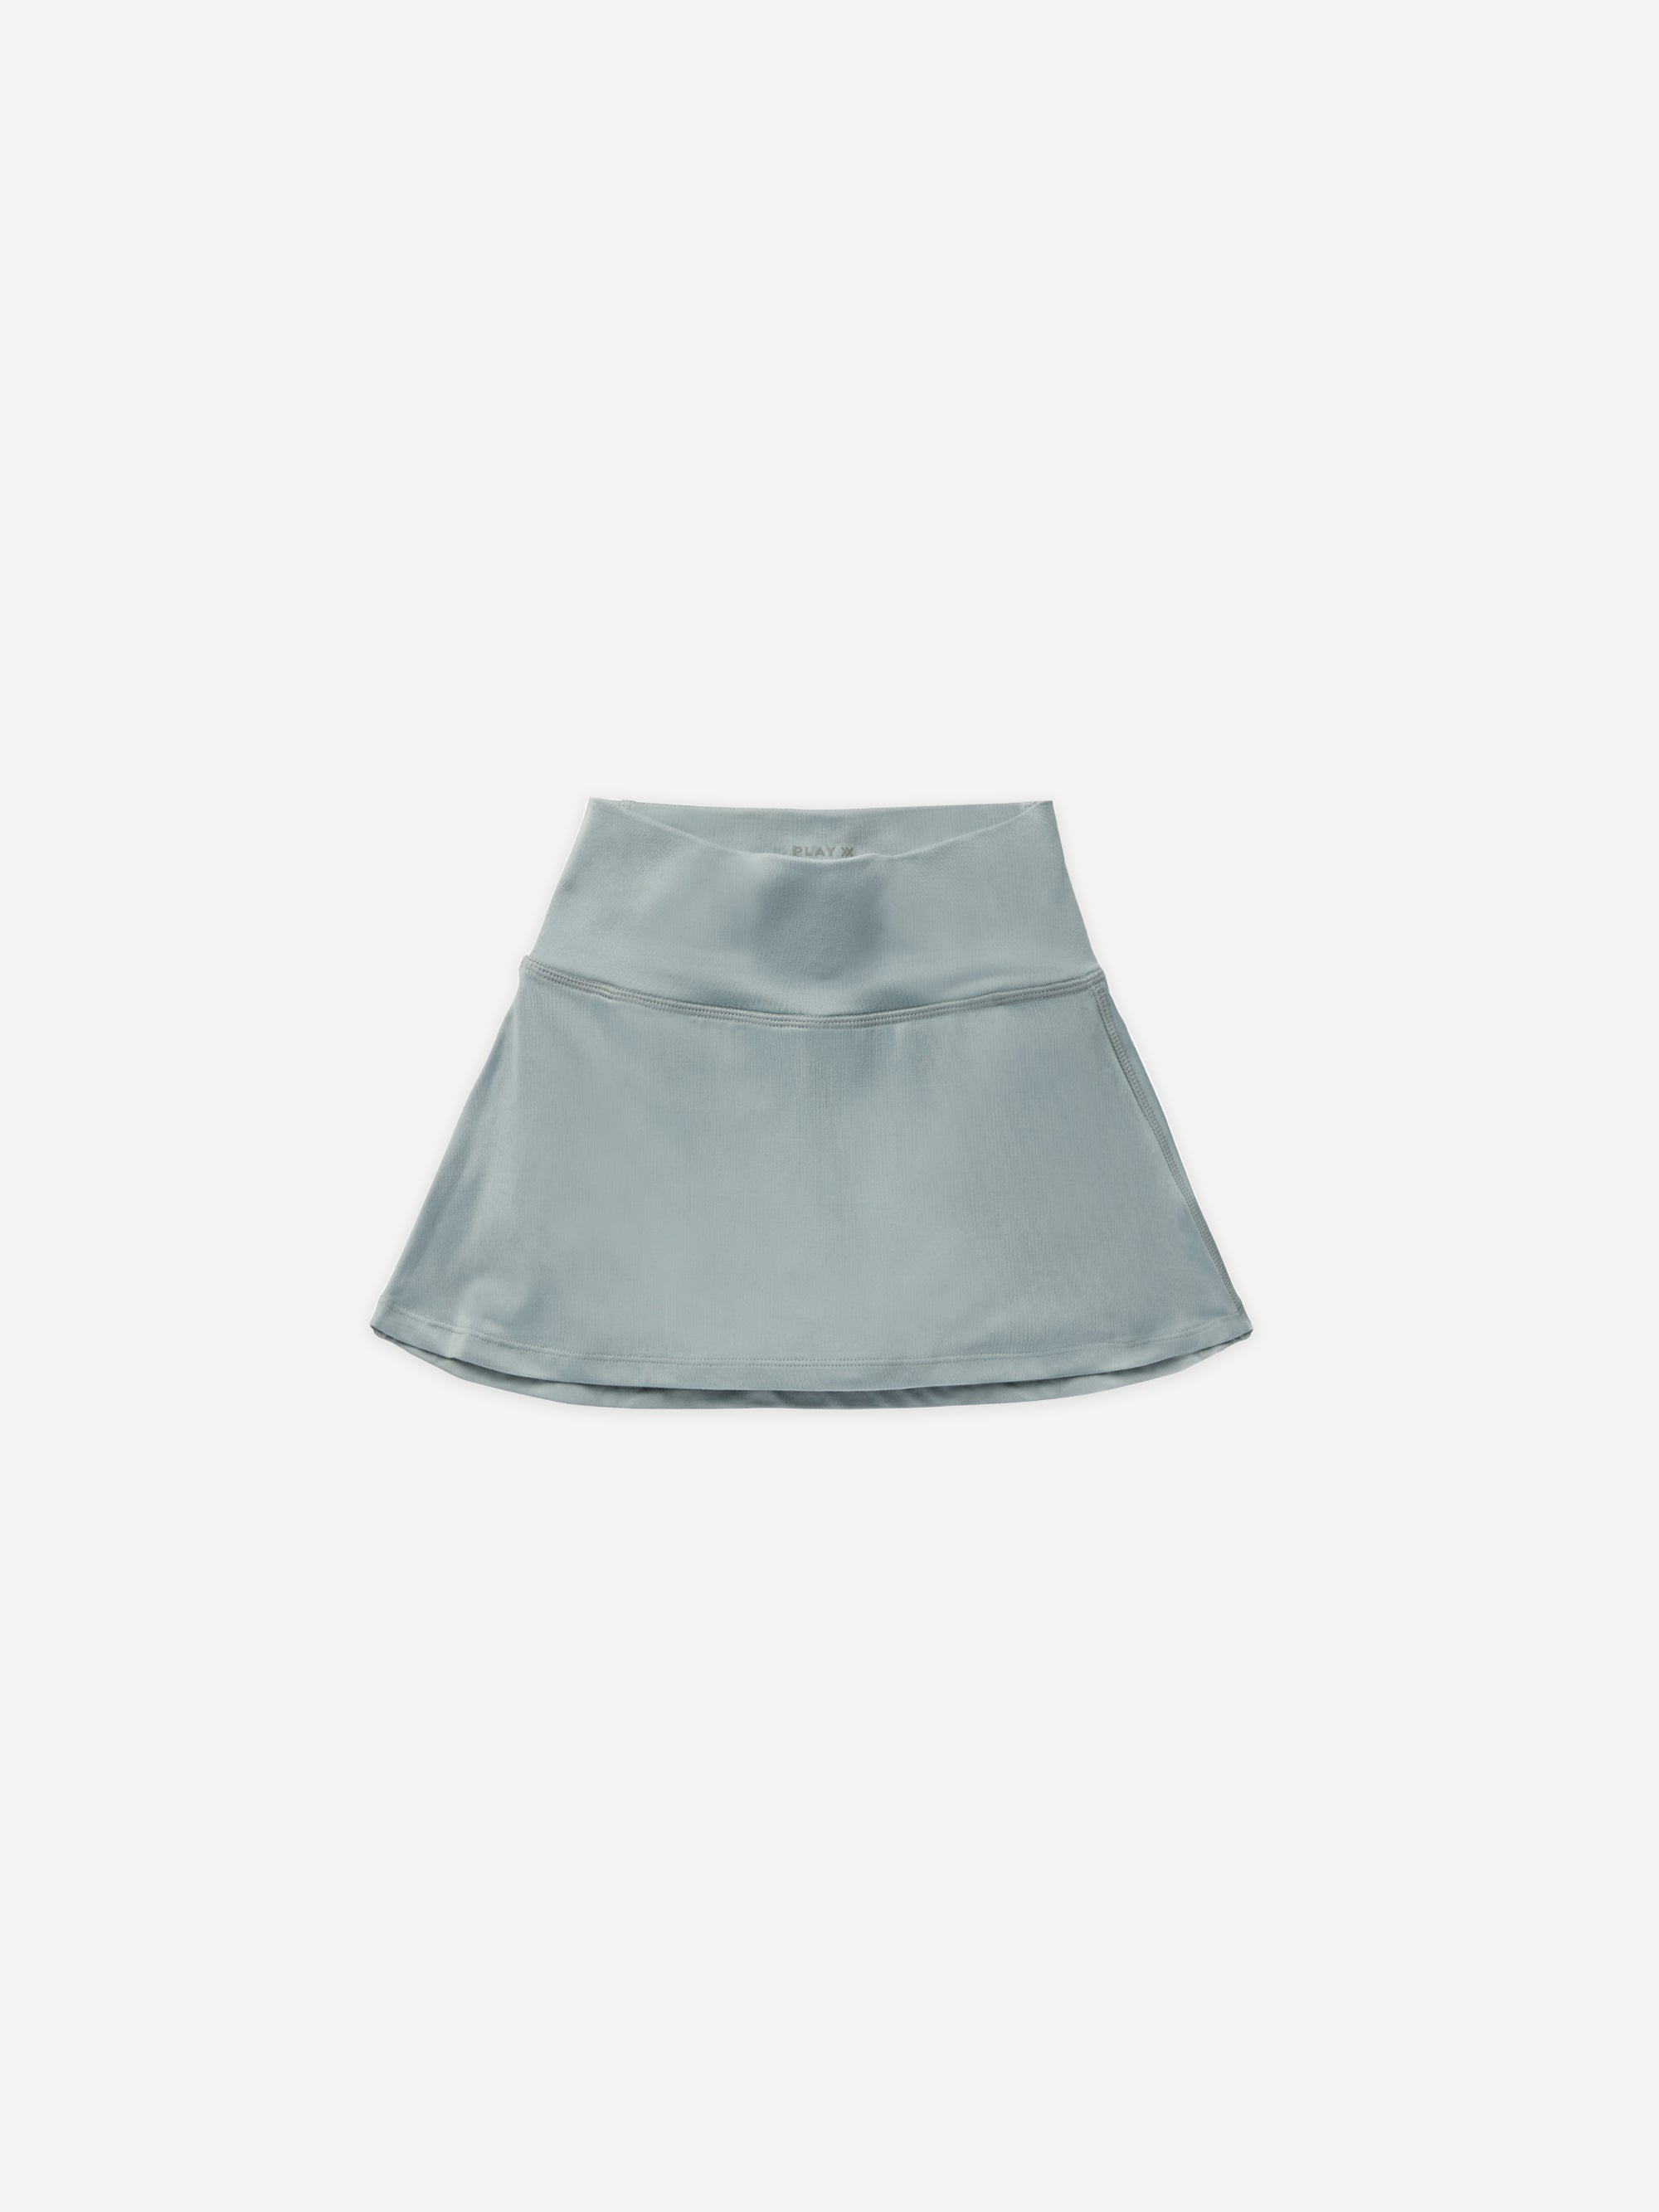 Bay Skirt || Blue - Rylee + Cru | Kids Clothes | Trendy Baby Clothes | Modern Infant Outfits |